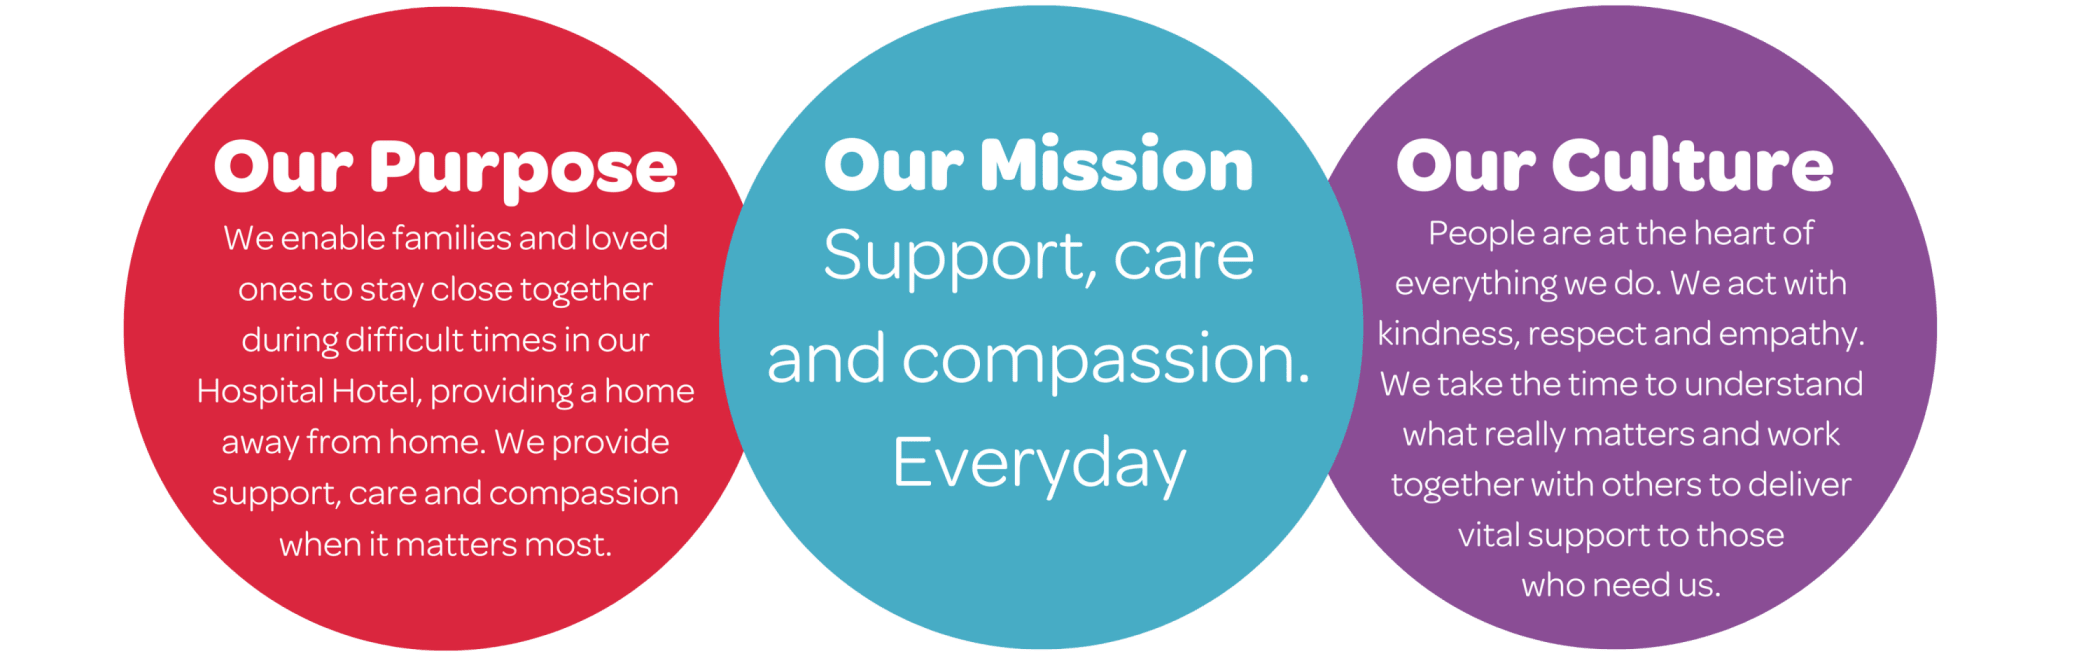 Our charities mission, vision and culture.